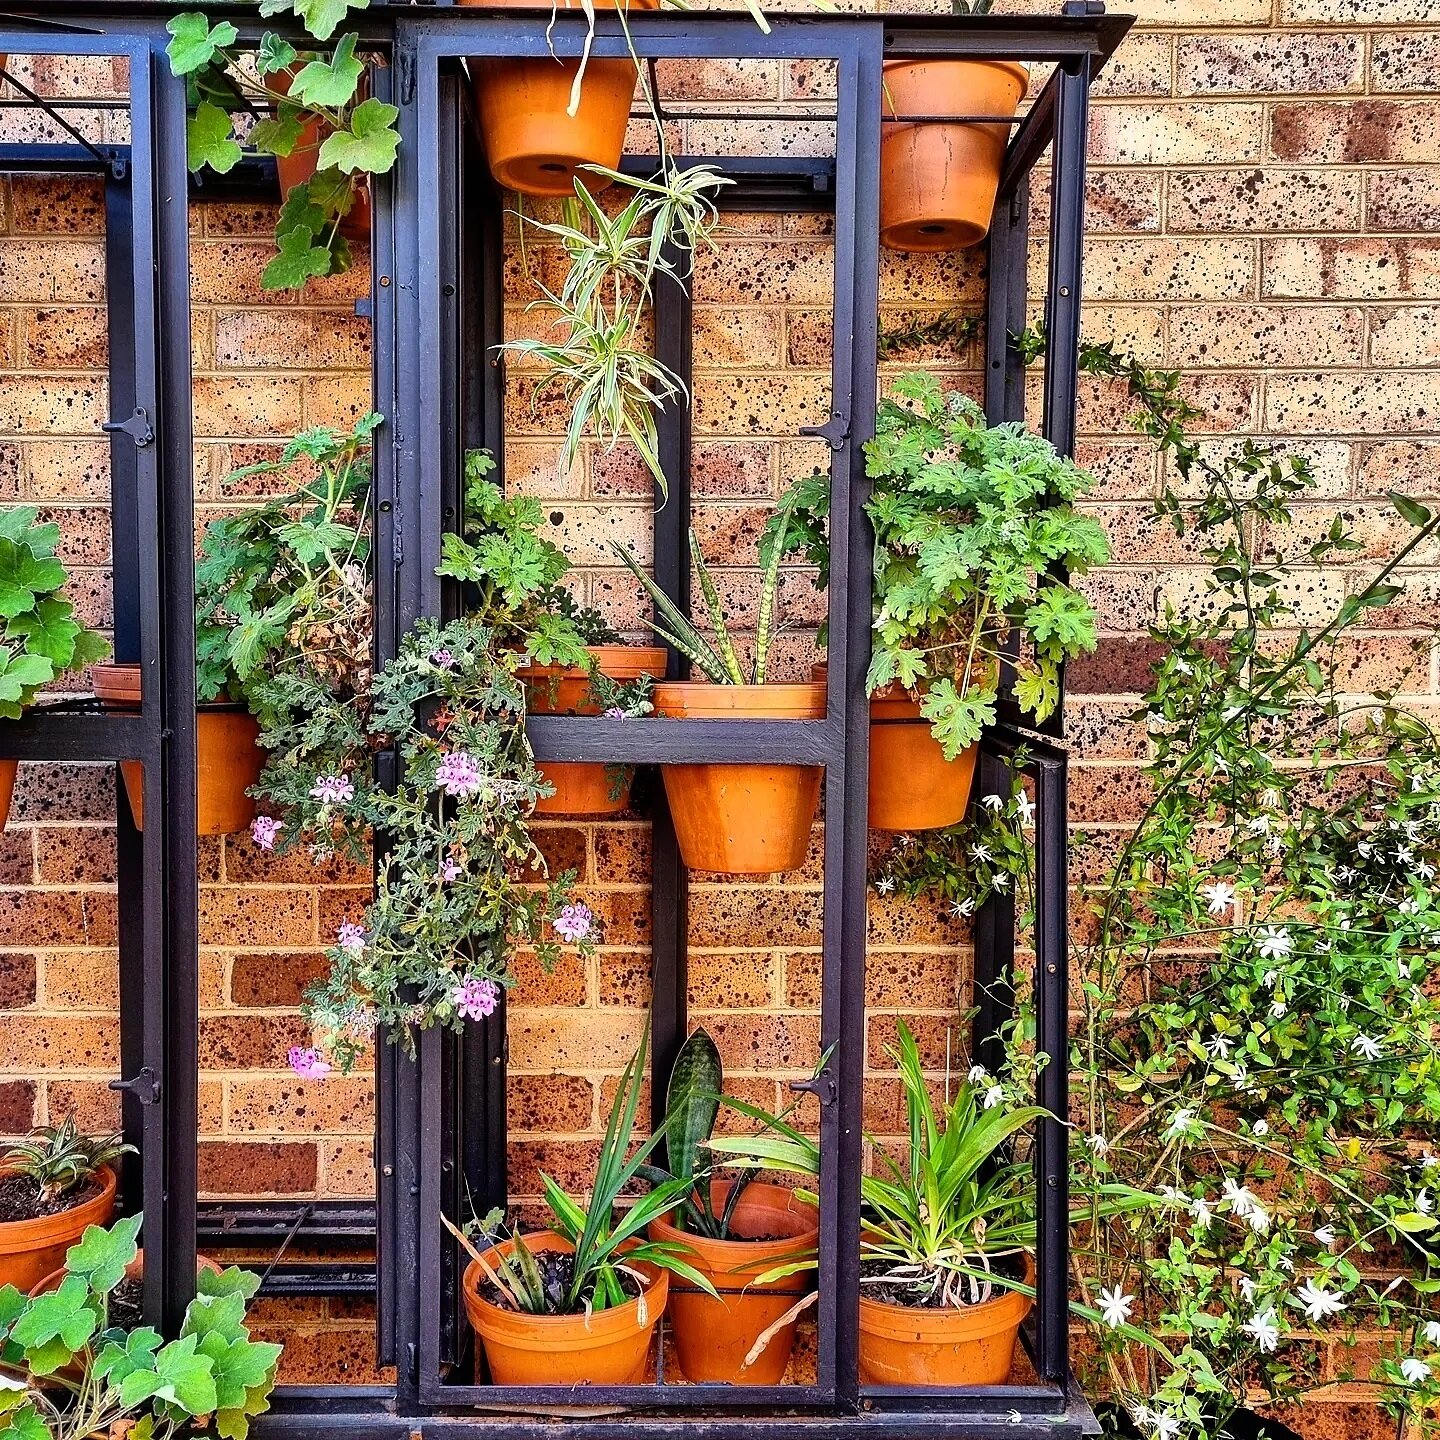 Spring is in full bloom at the FDG office...
- 
Indigenous aromatic plants greet guests as they arrive at Fieldworks Design Group. 
#repurposed steel window frames support suspended terracotta pots housing these showy plants. This #upcycled and low m